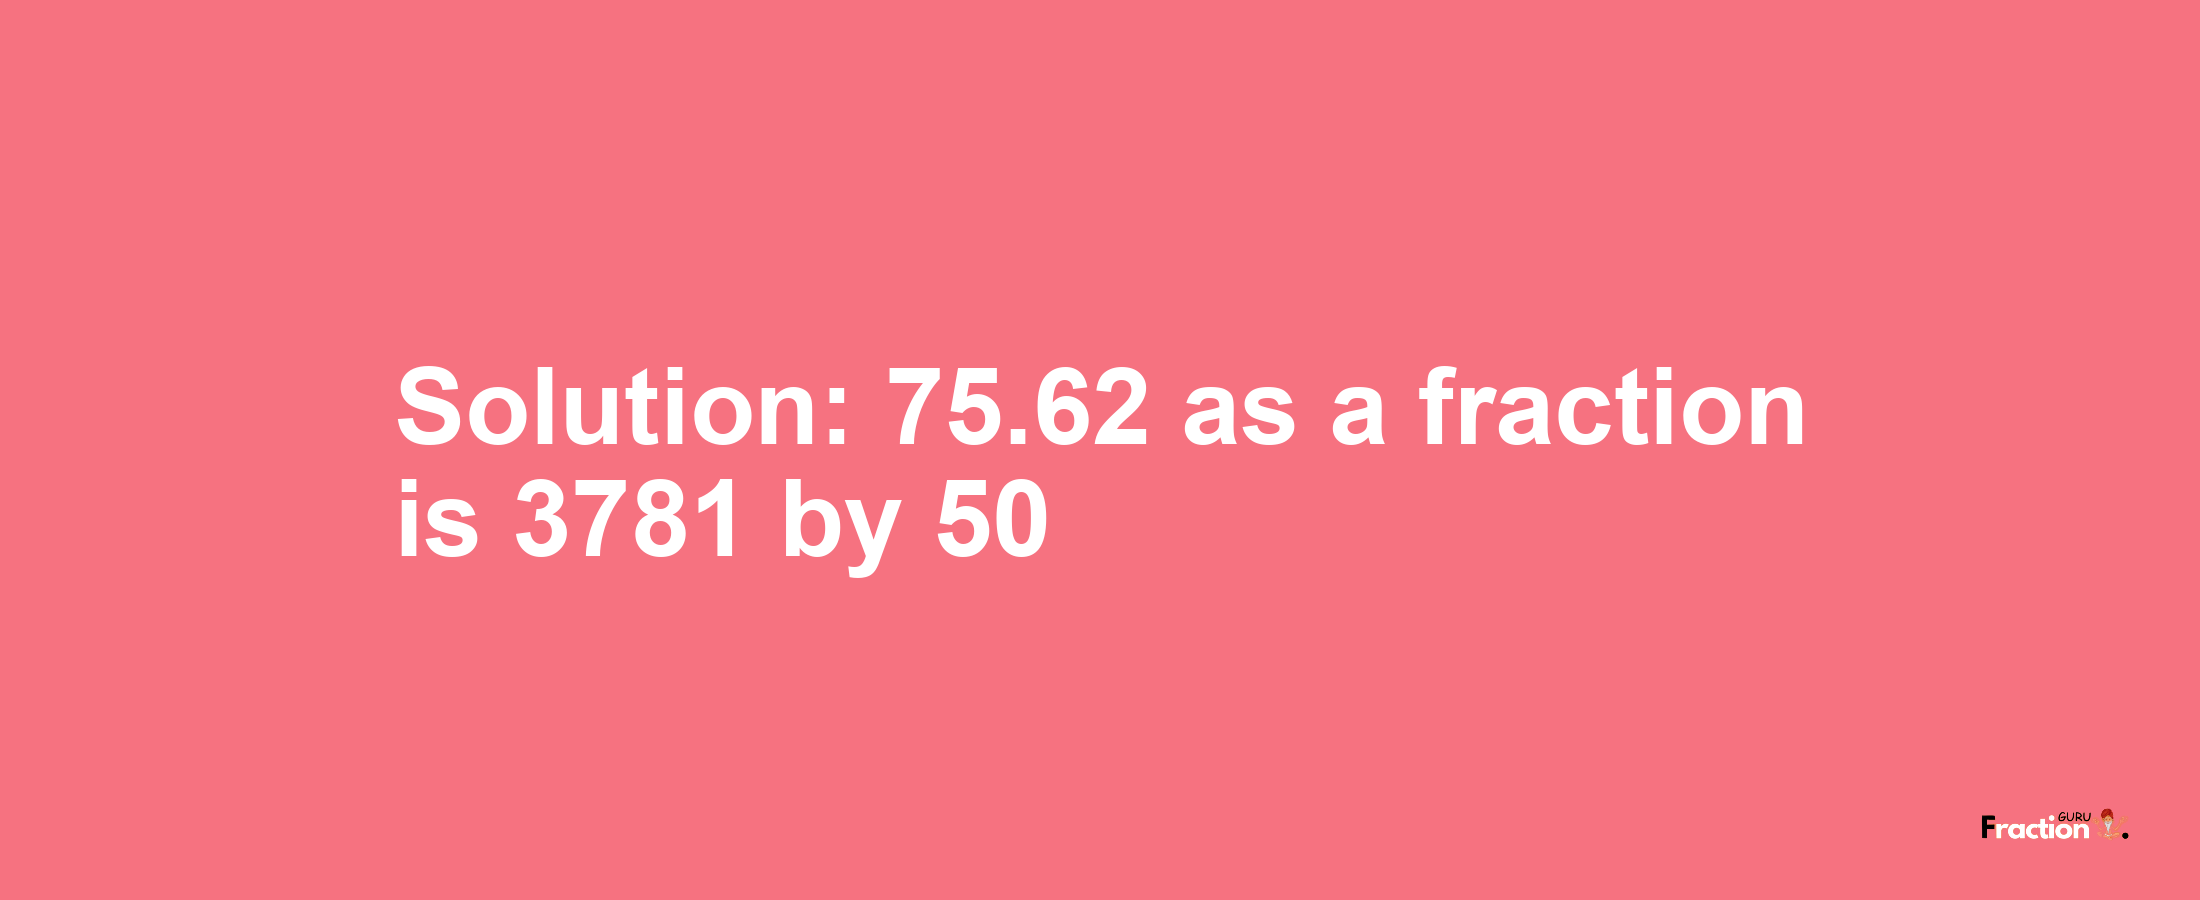 Solution:75.62 as a fraction is 3781/50